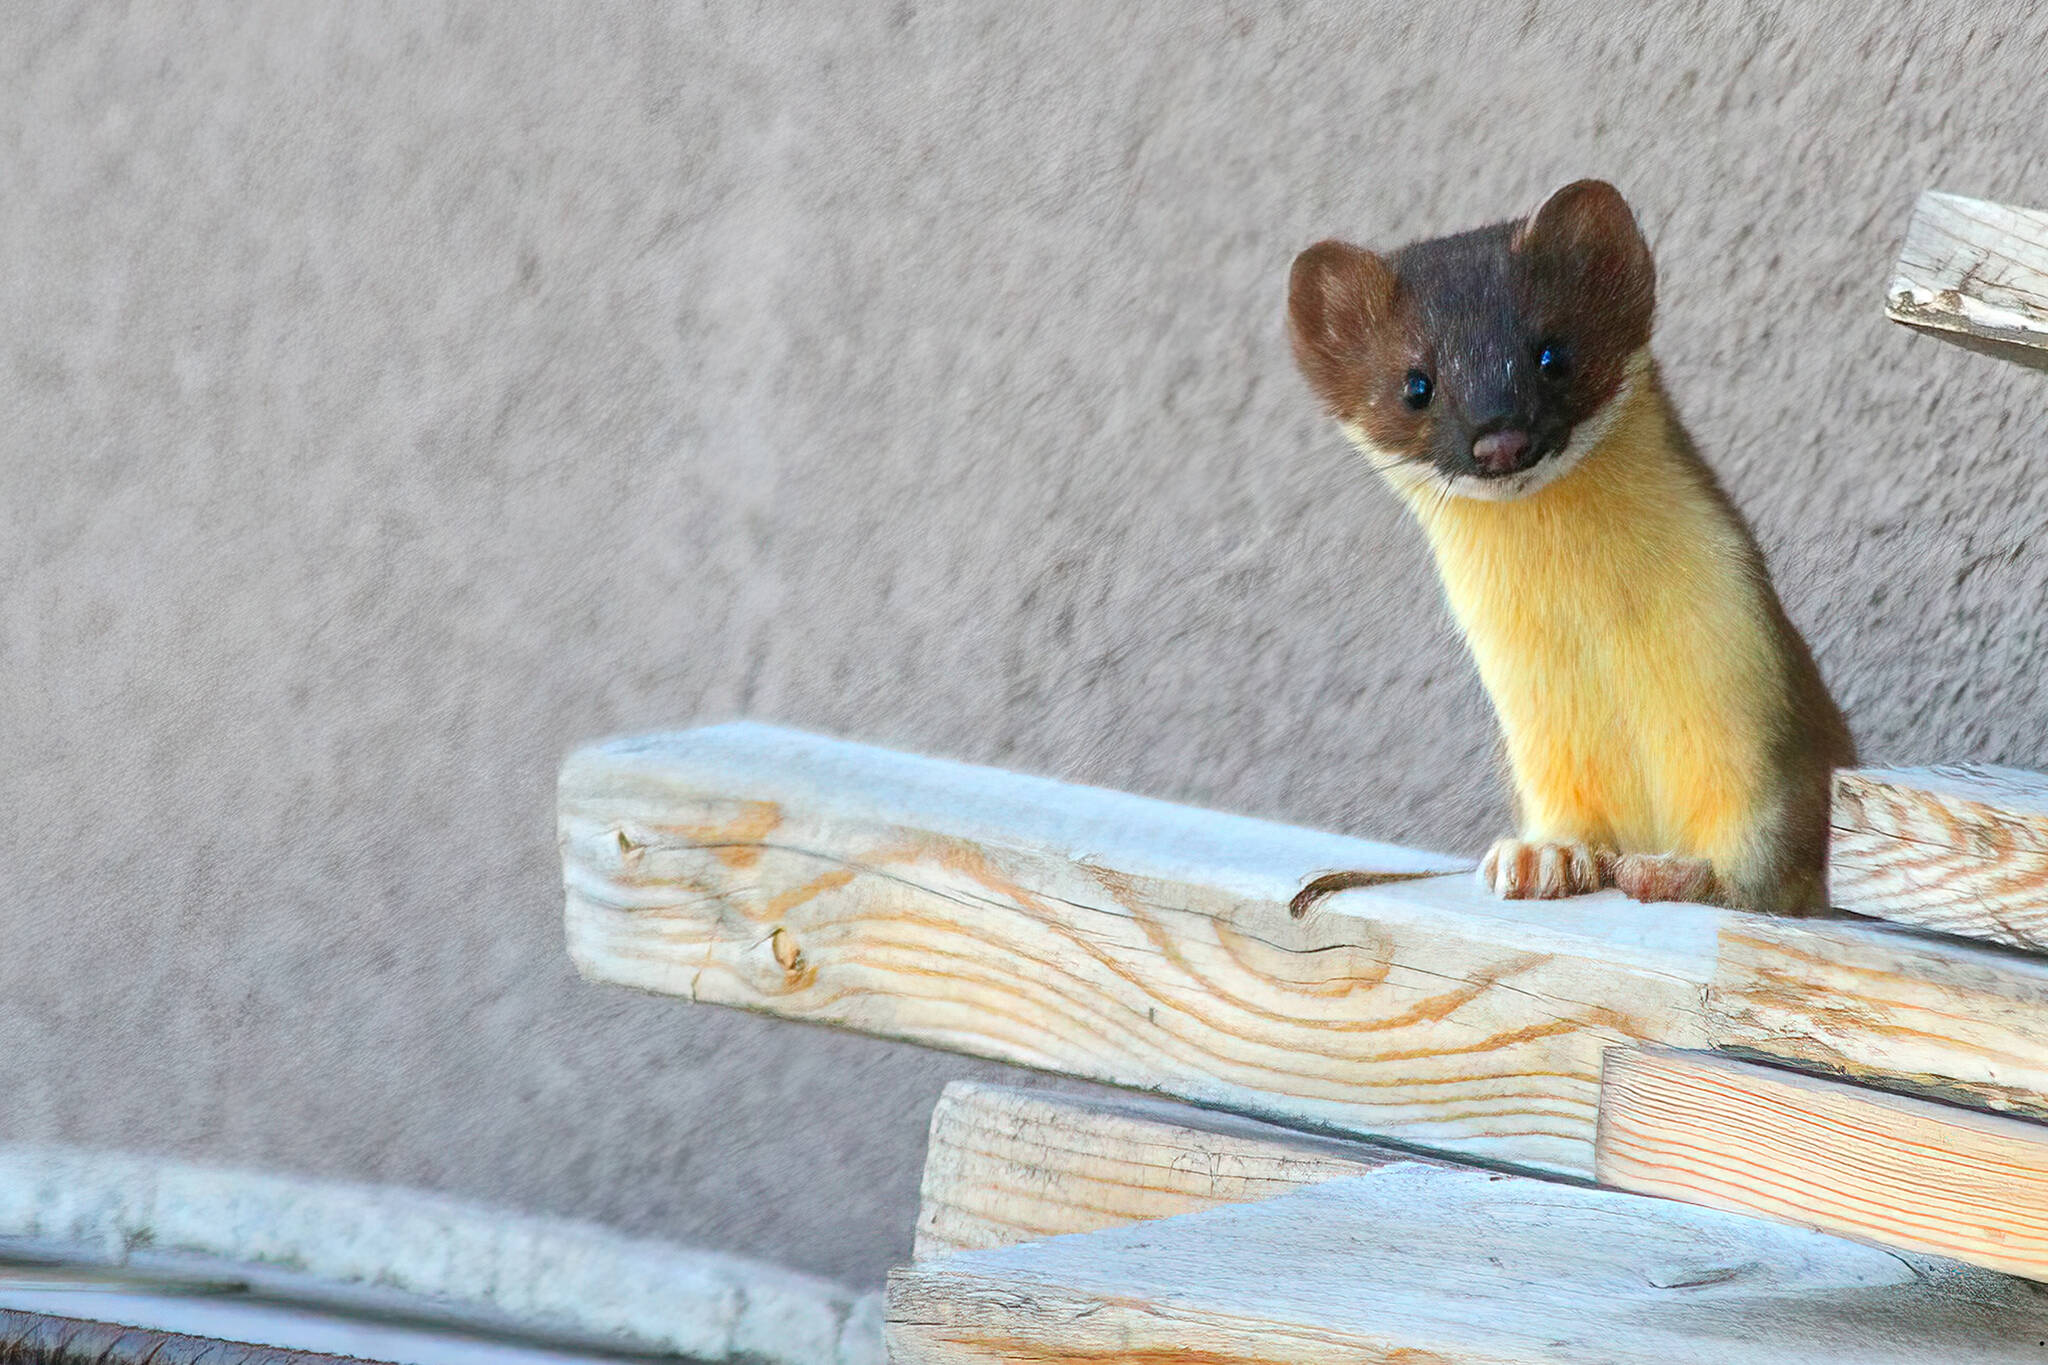 Courtesy Photo / Kerry Howard 
This July 13 photo shows a short-tailed weasel. Short-tailed weasels or ermines wear brown summer coats but white coats in winter. The animals are among the dozens of species that make up the family Mustelidae. The long, slender body form of weasels is well-suited for these predators to pursue voles and mice into narrow tunnels and tight spaces.